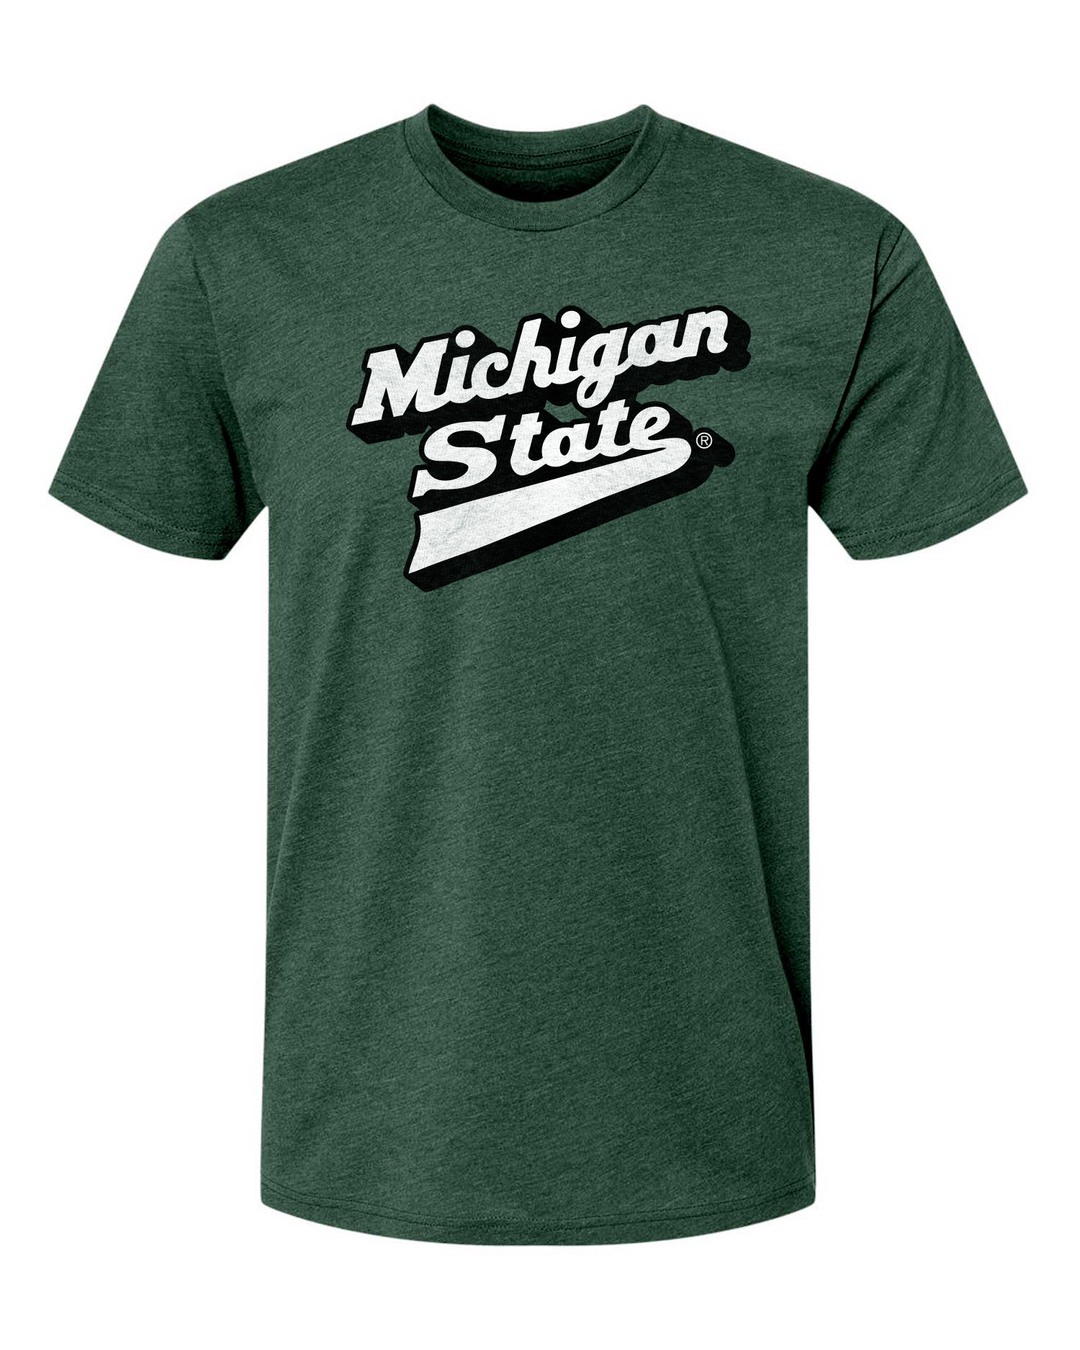 Michigan State University Forest Green T-Shirt with White and Black Script Hockey Logo Printed on the Chest